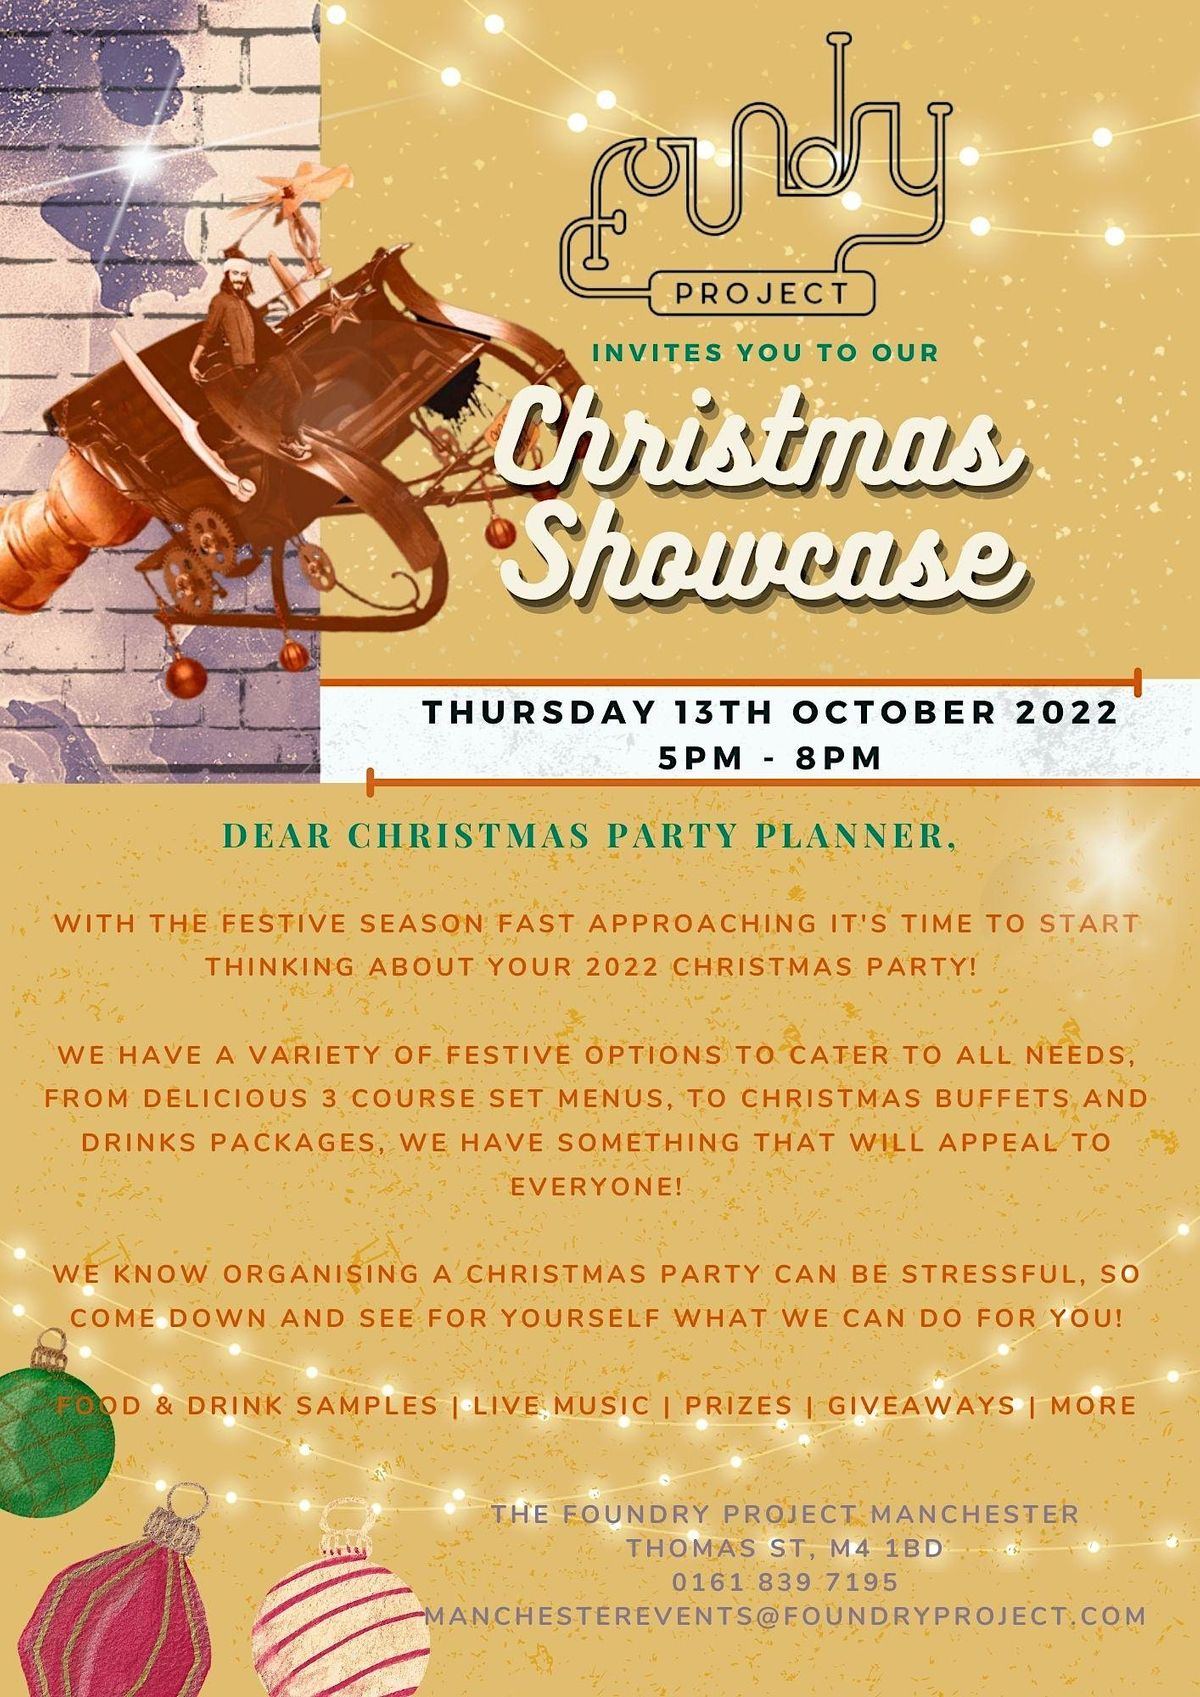 The Foundry Project Christmas Showcase